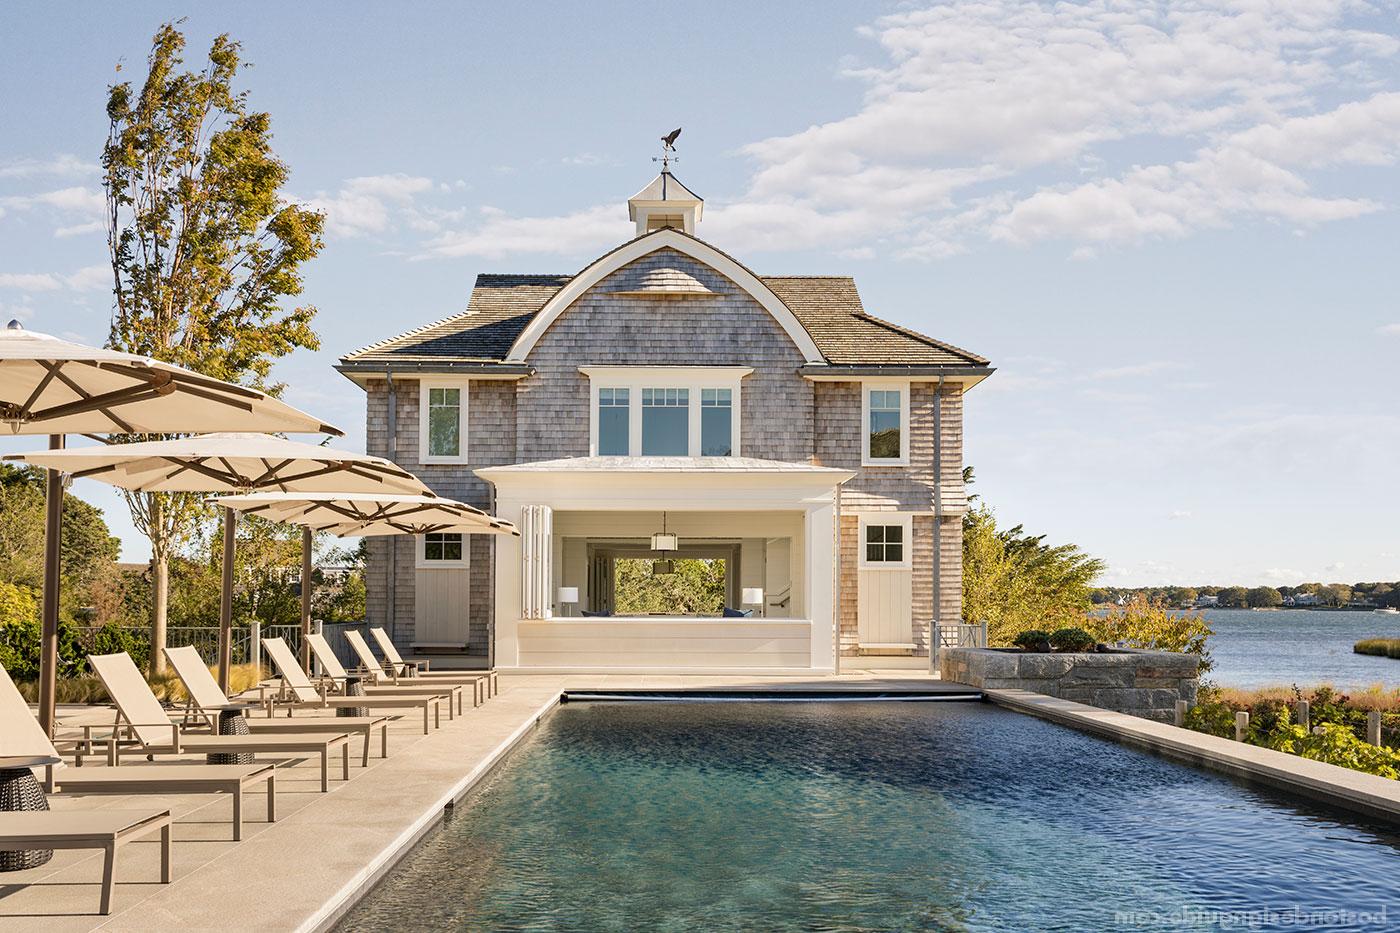 Classic Cape Cod poolhouse with cupola designed by Catalano Architects and constructed by KVC Builders